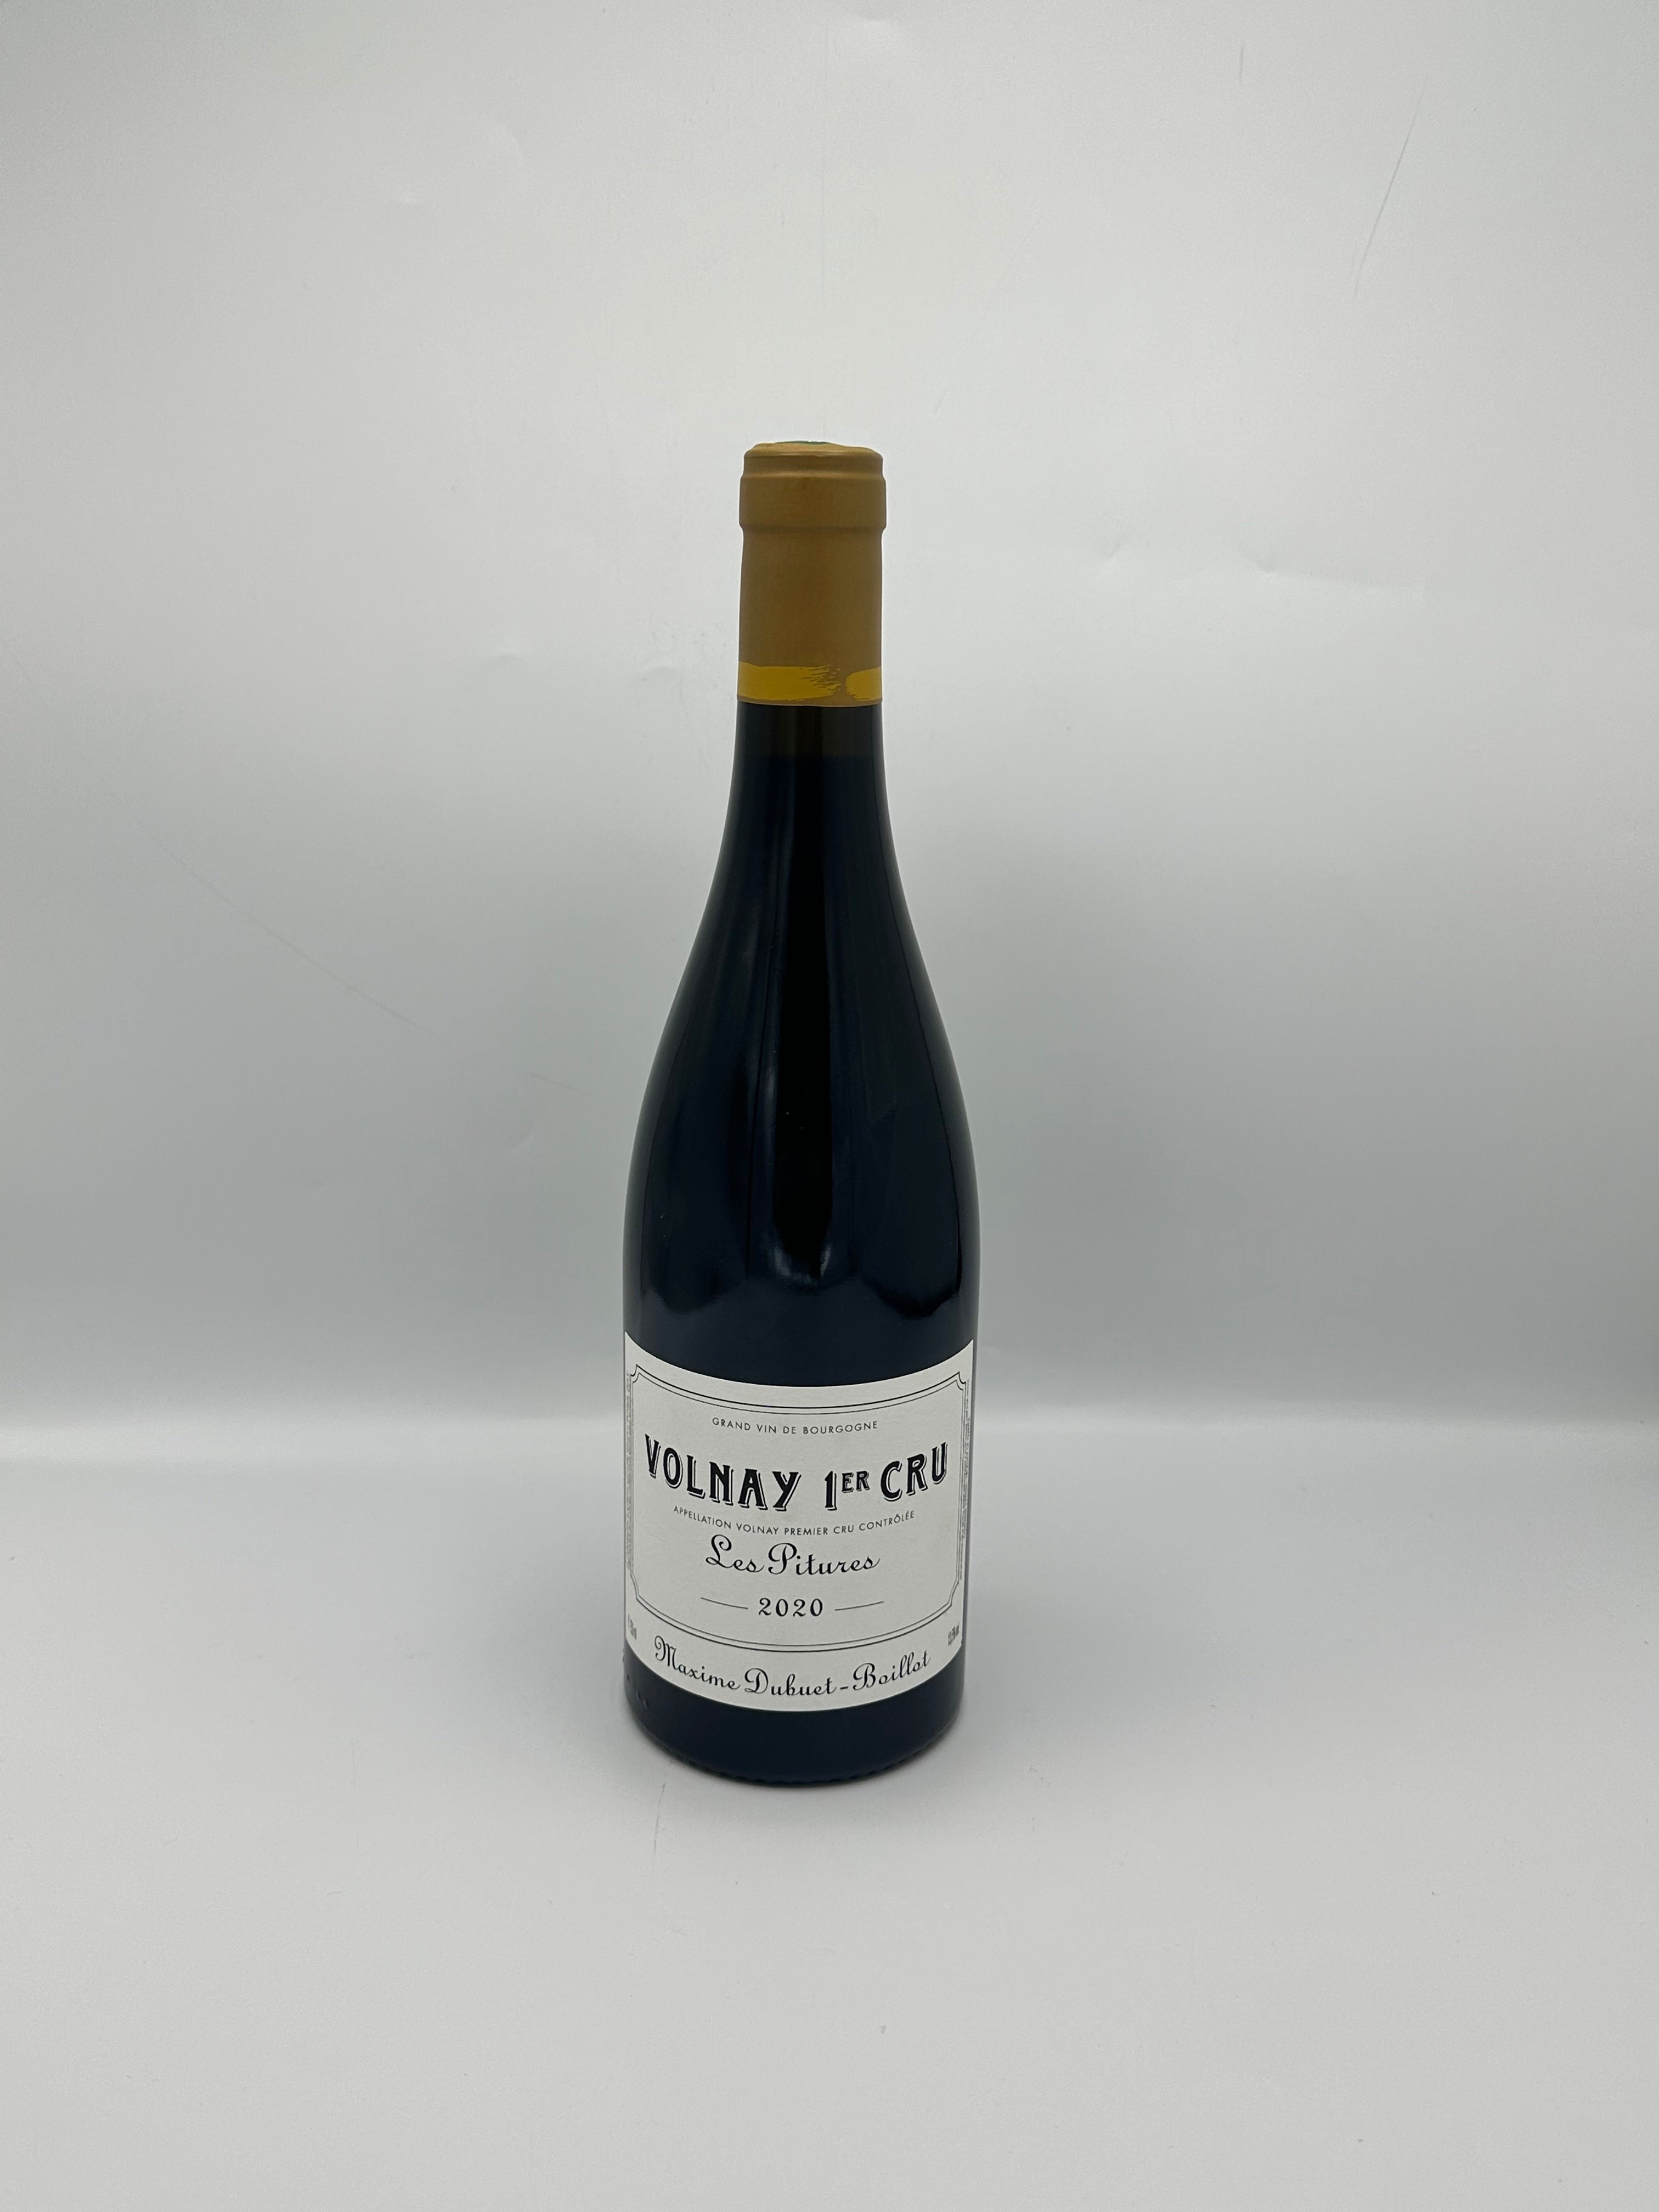 Volnay 1er Cru "Les Pitures" 2020 Rouge - Maxime Dubuet Boillot